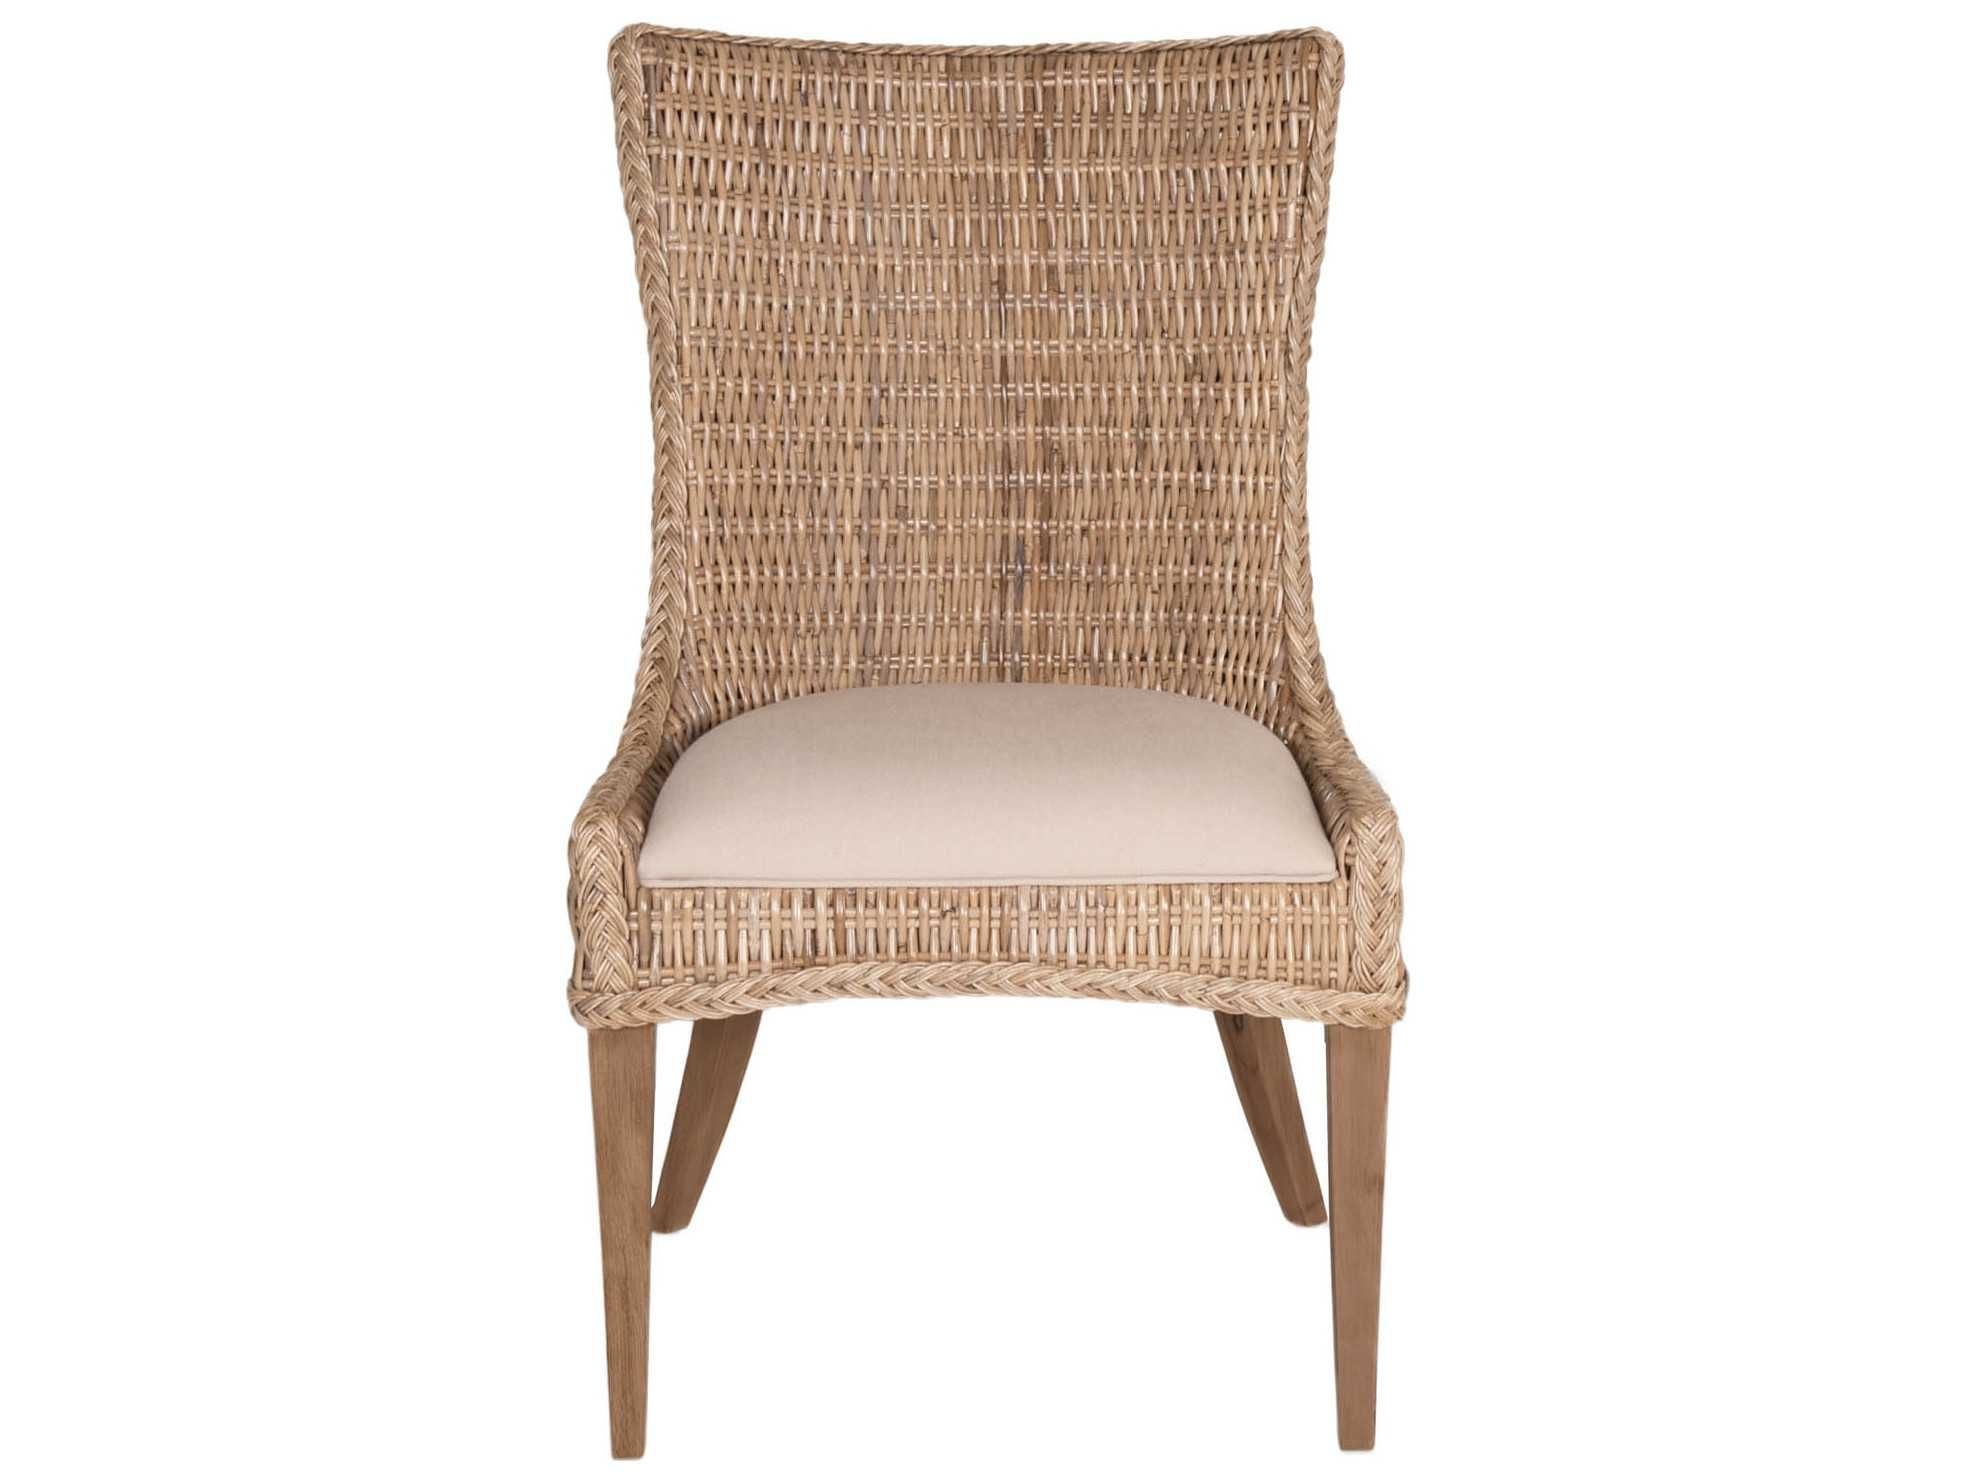 New Wicker Greco Side Chair (Set of 2)